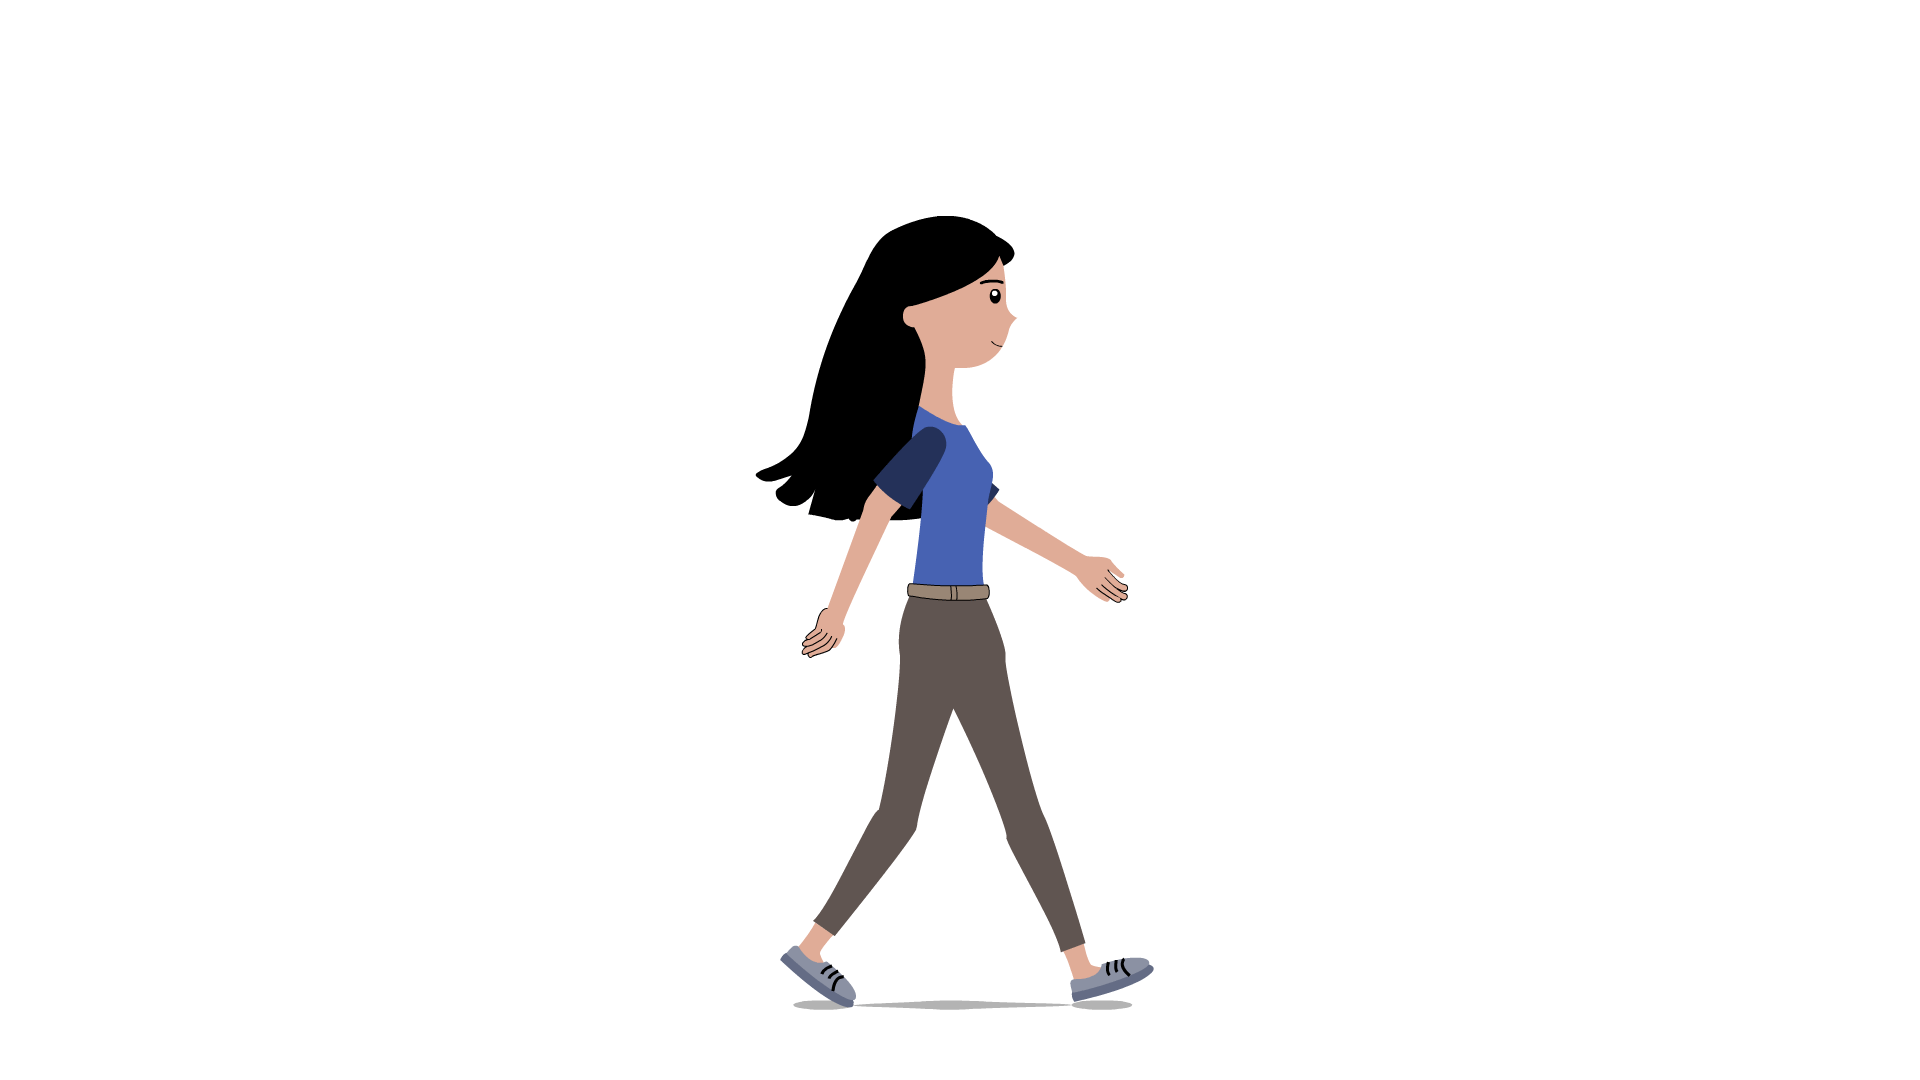 Walk Cycle Animation by Hyacinth on Dribbble